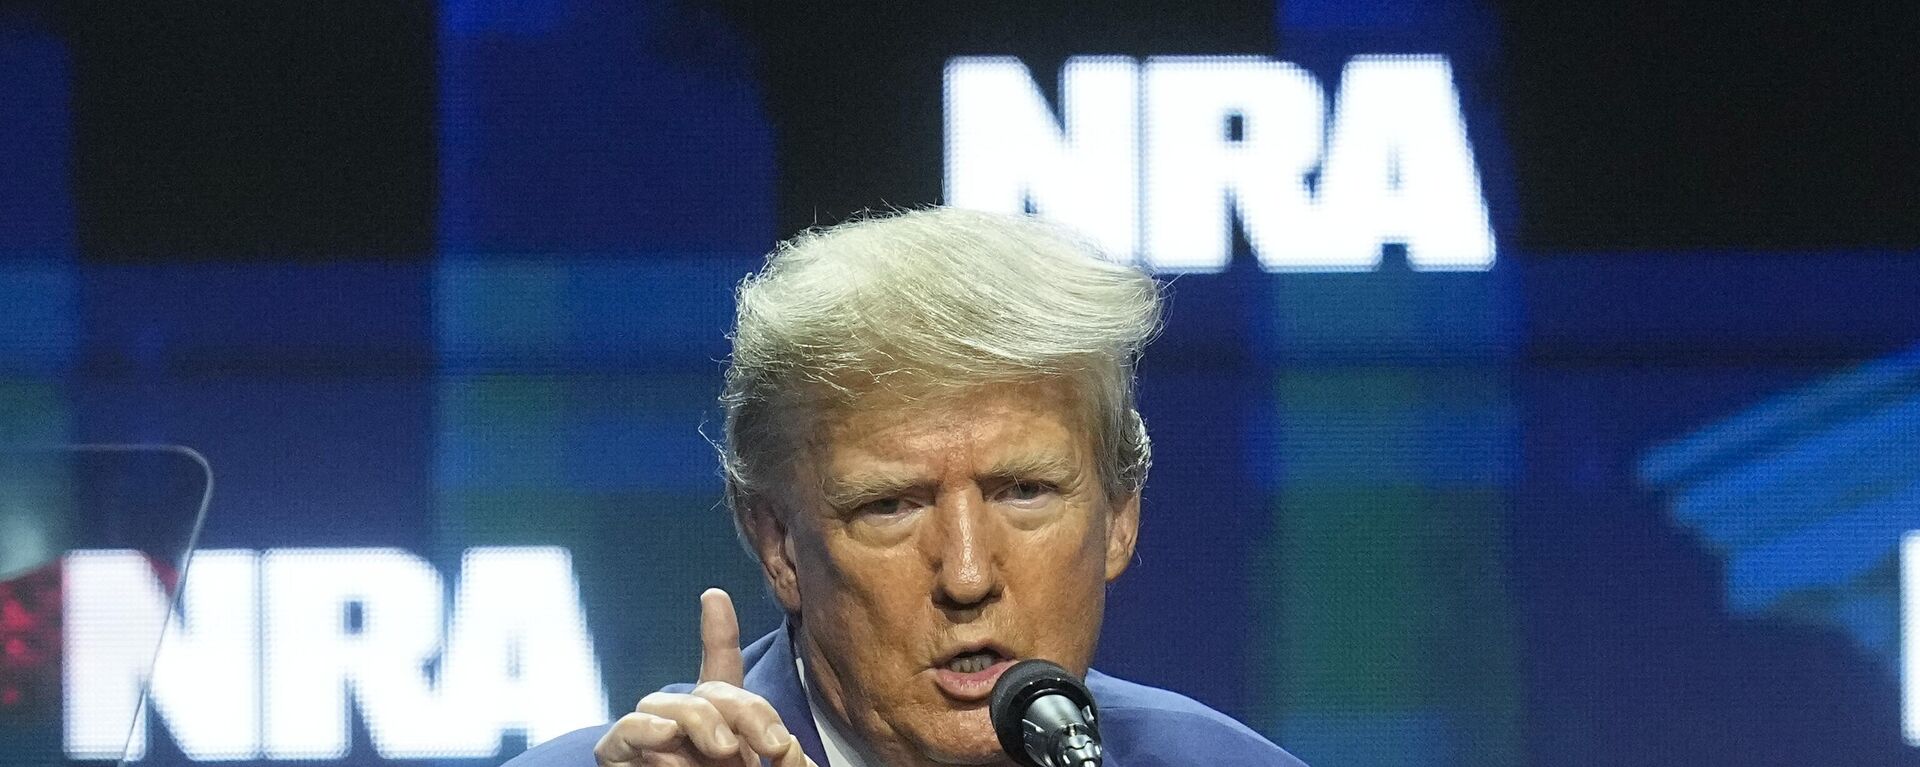 Former President Donald Trump speaks during the National Rifle Association Convention, Friday, April 14, 2023, in Indianapolis. - Sputnik International, 1920, 15.04.2023